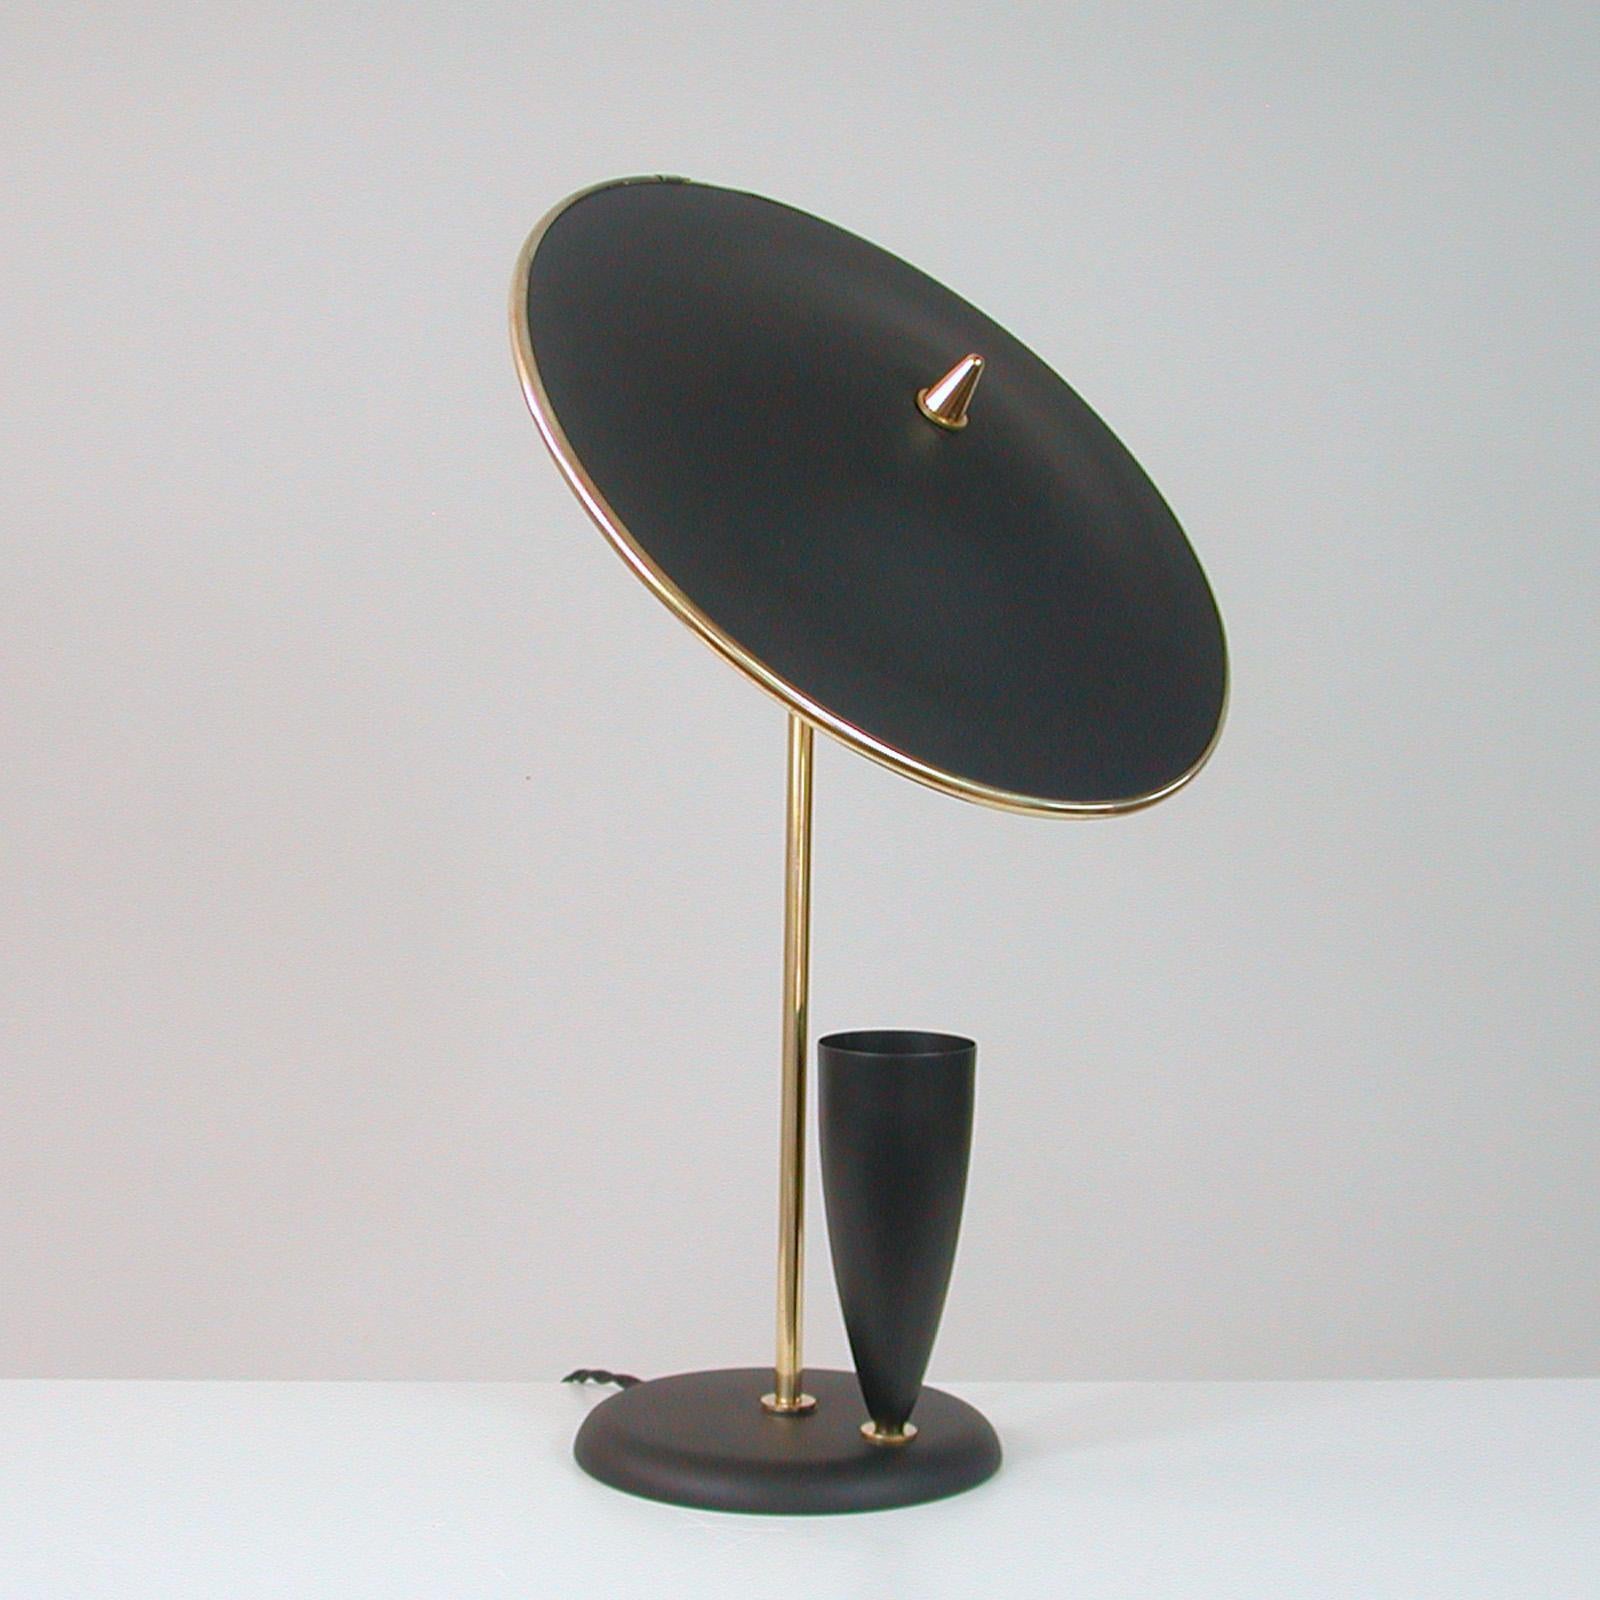 French Midcentury Reflecting Black and Brass Table Lamp, 1950s For Sale 12